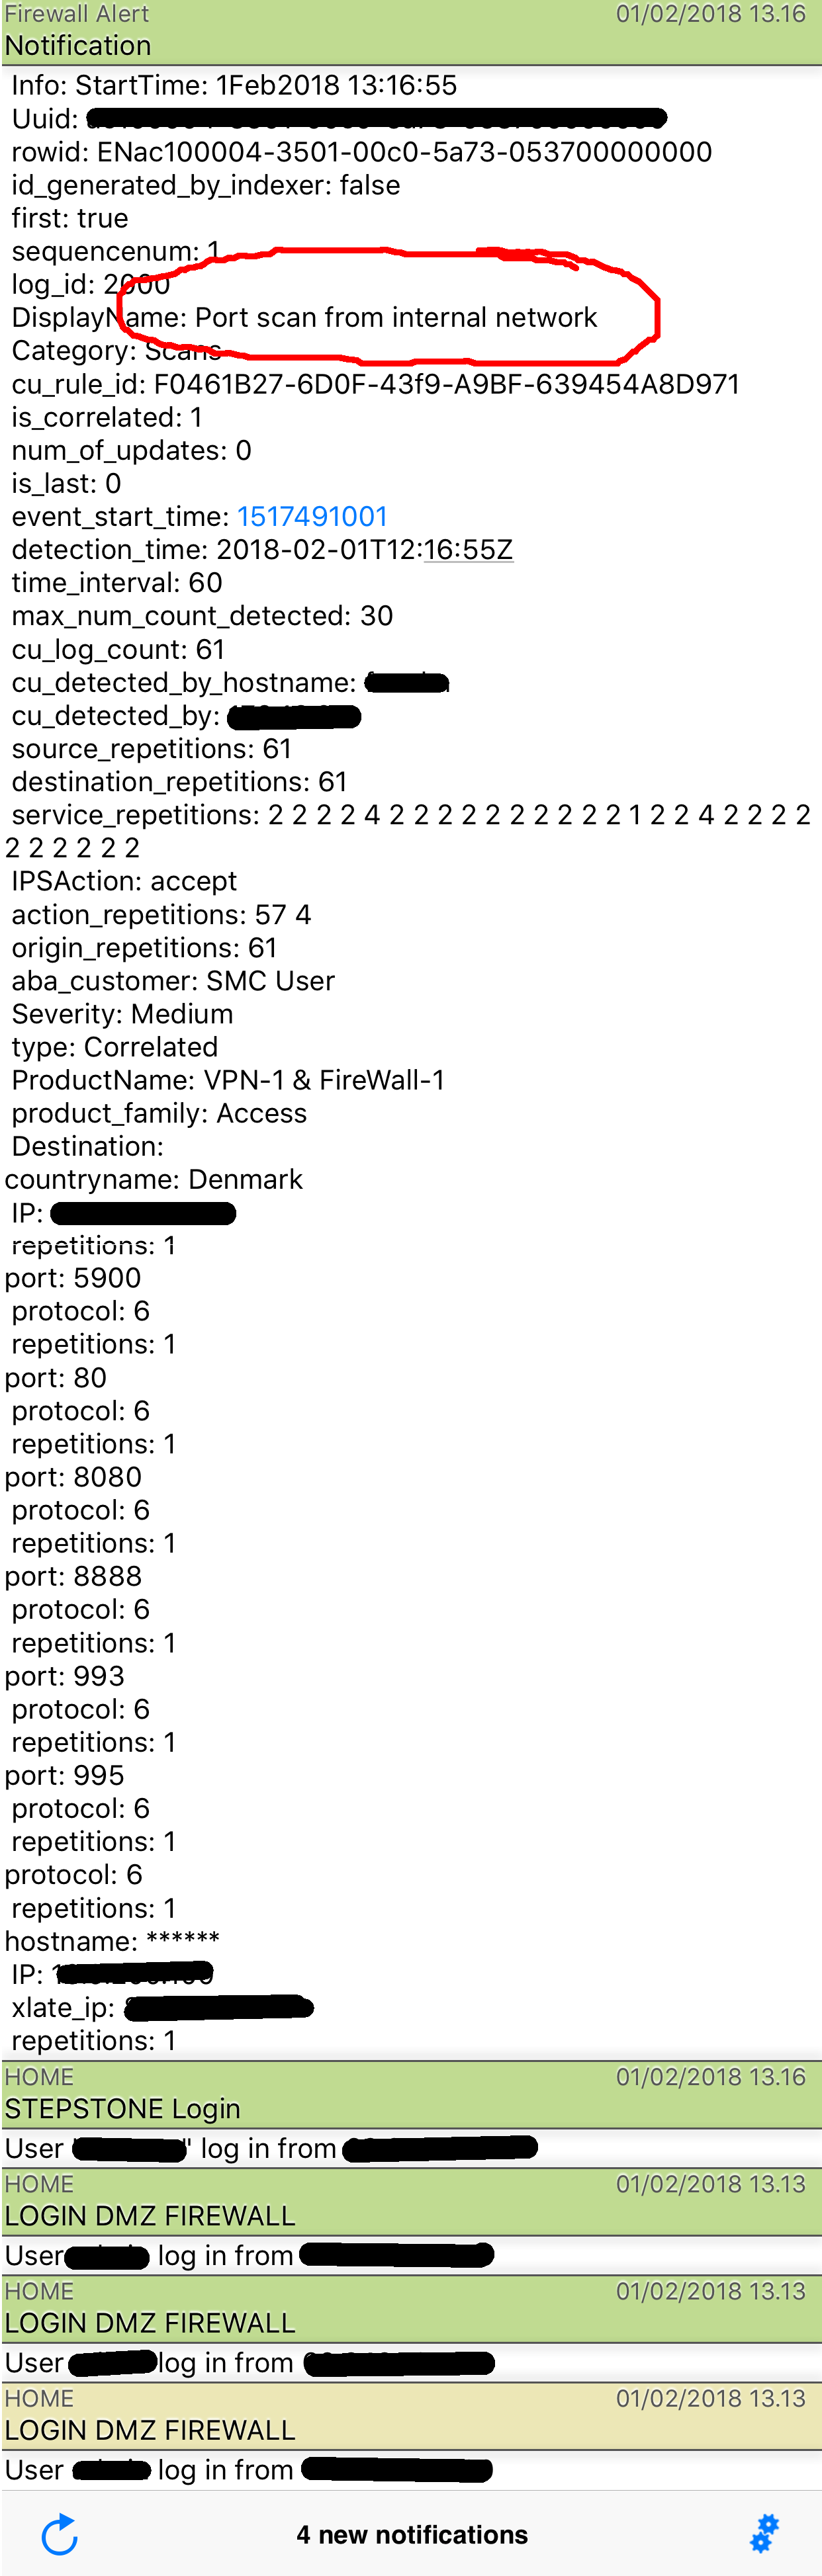 This is a prowl alert showing the details of a portscanning made from within the LAN